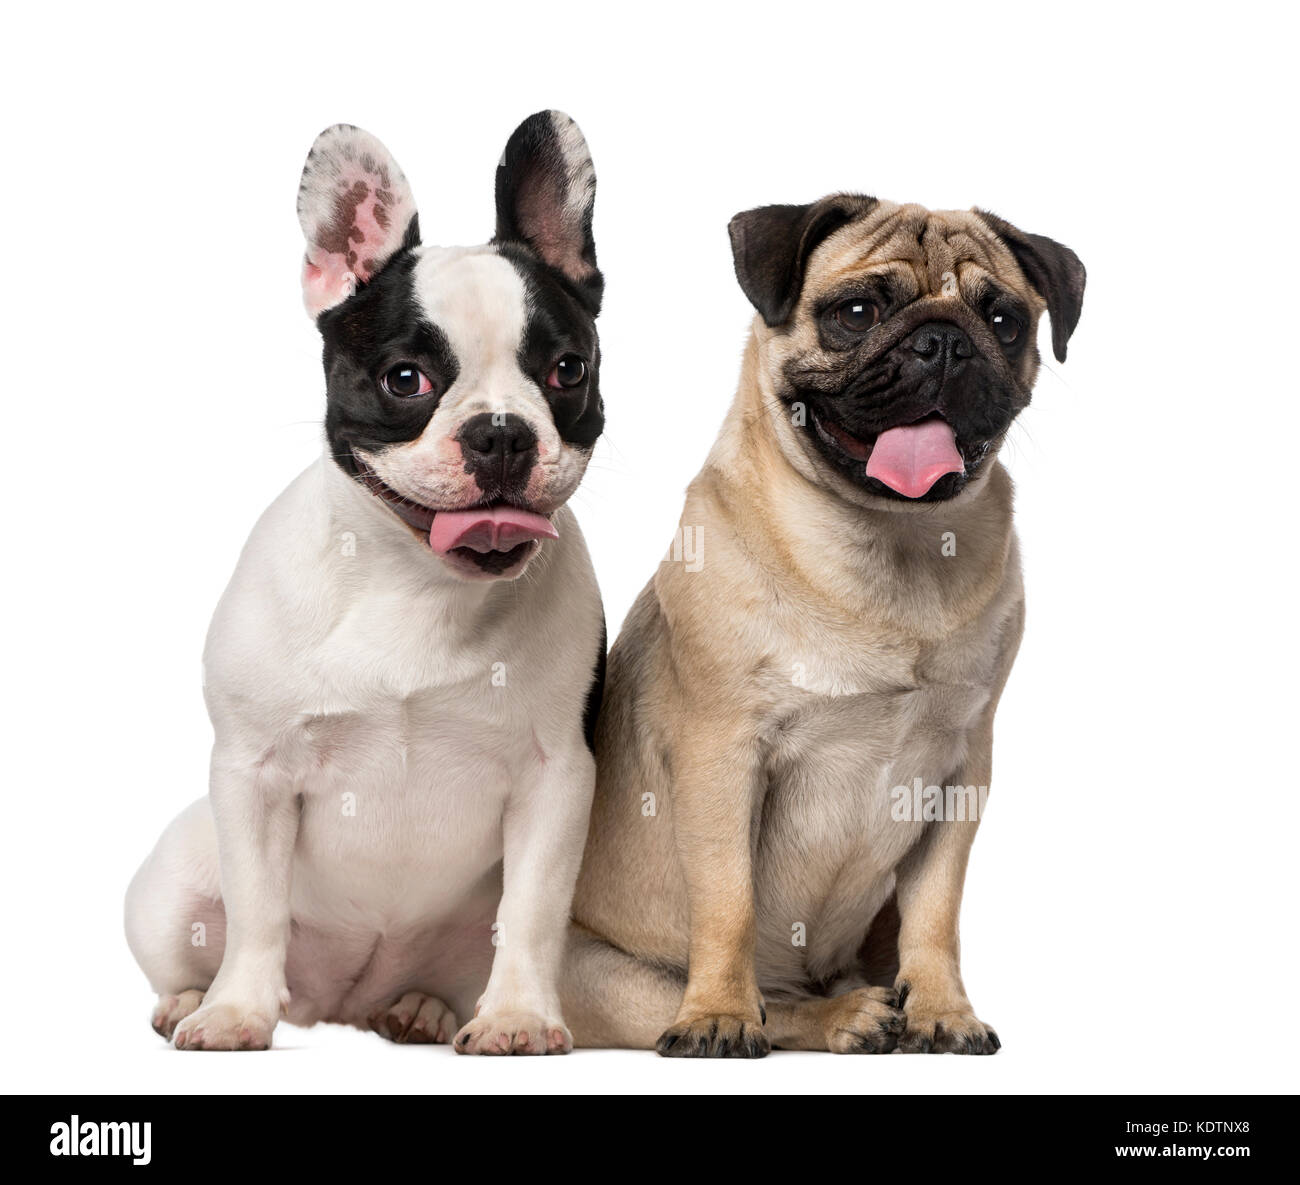 French Bulldog (7 months old), Pug (8 months old Stock Photo - Alamy